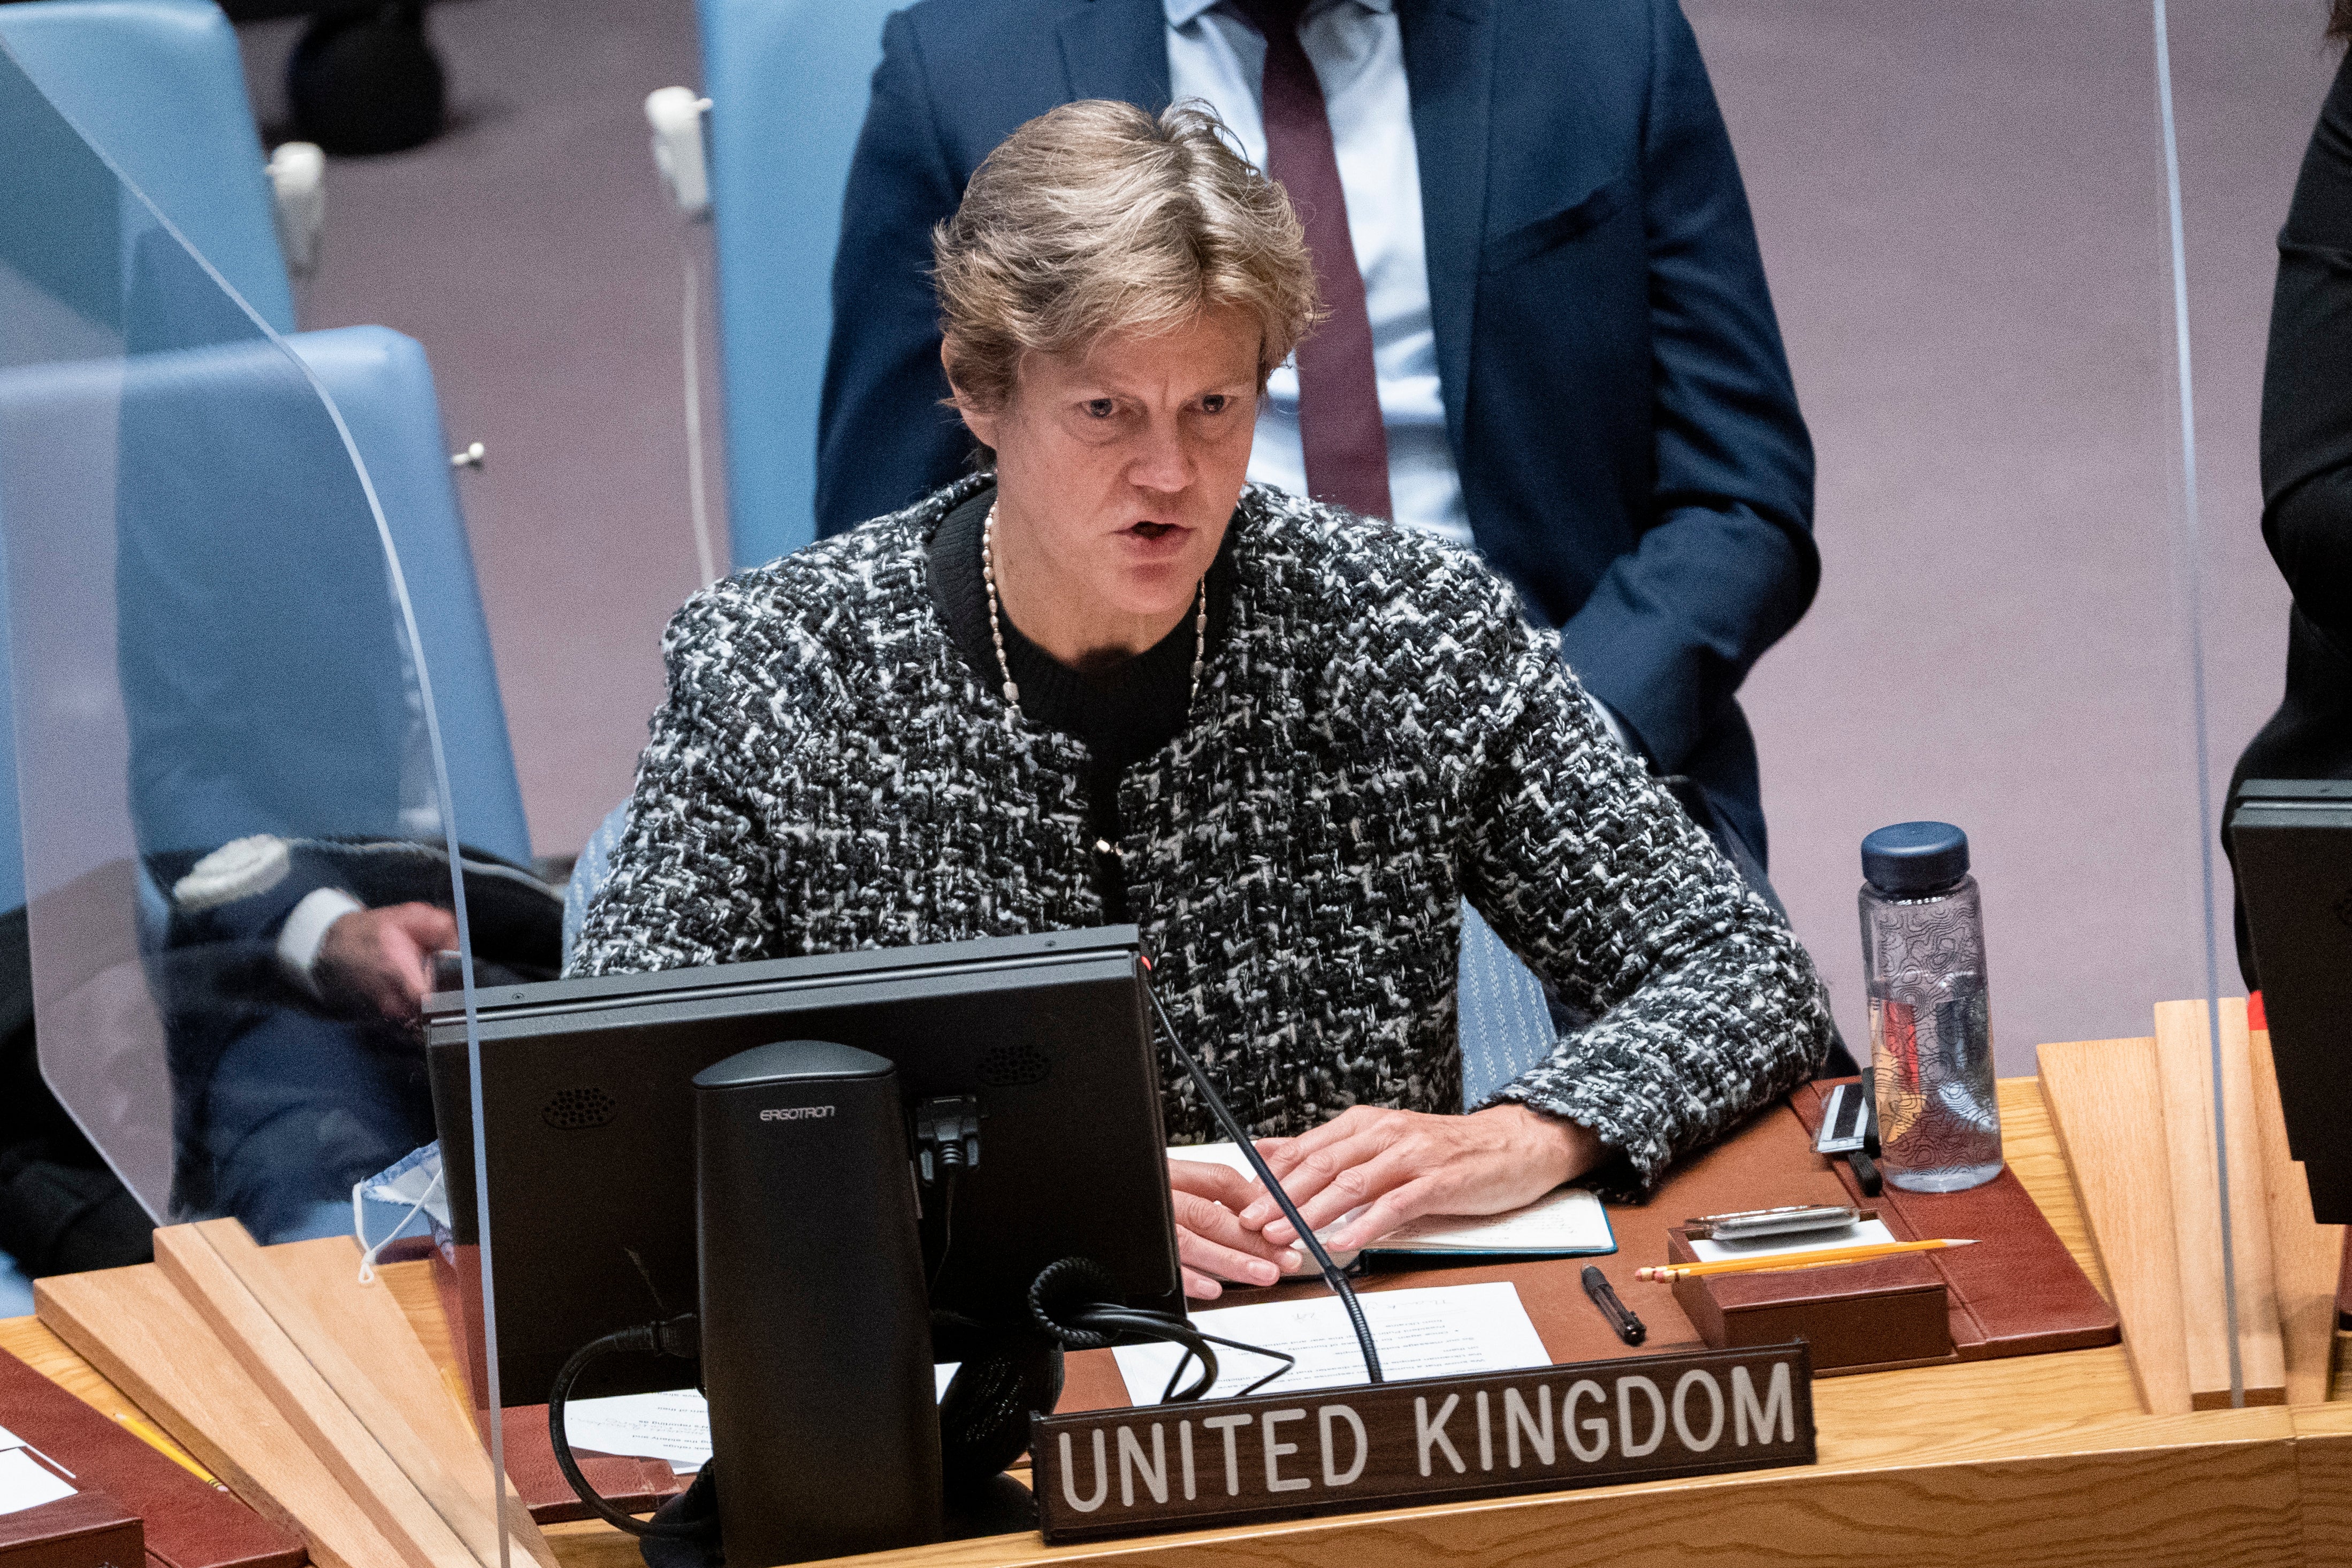 Barbara Woodward, permanent representative of the United Kingdom to the United Nations, speaks during a meeting of the security council (John Minchillo/PA)